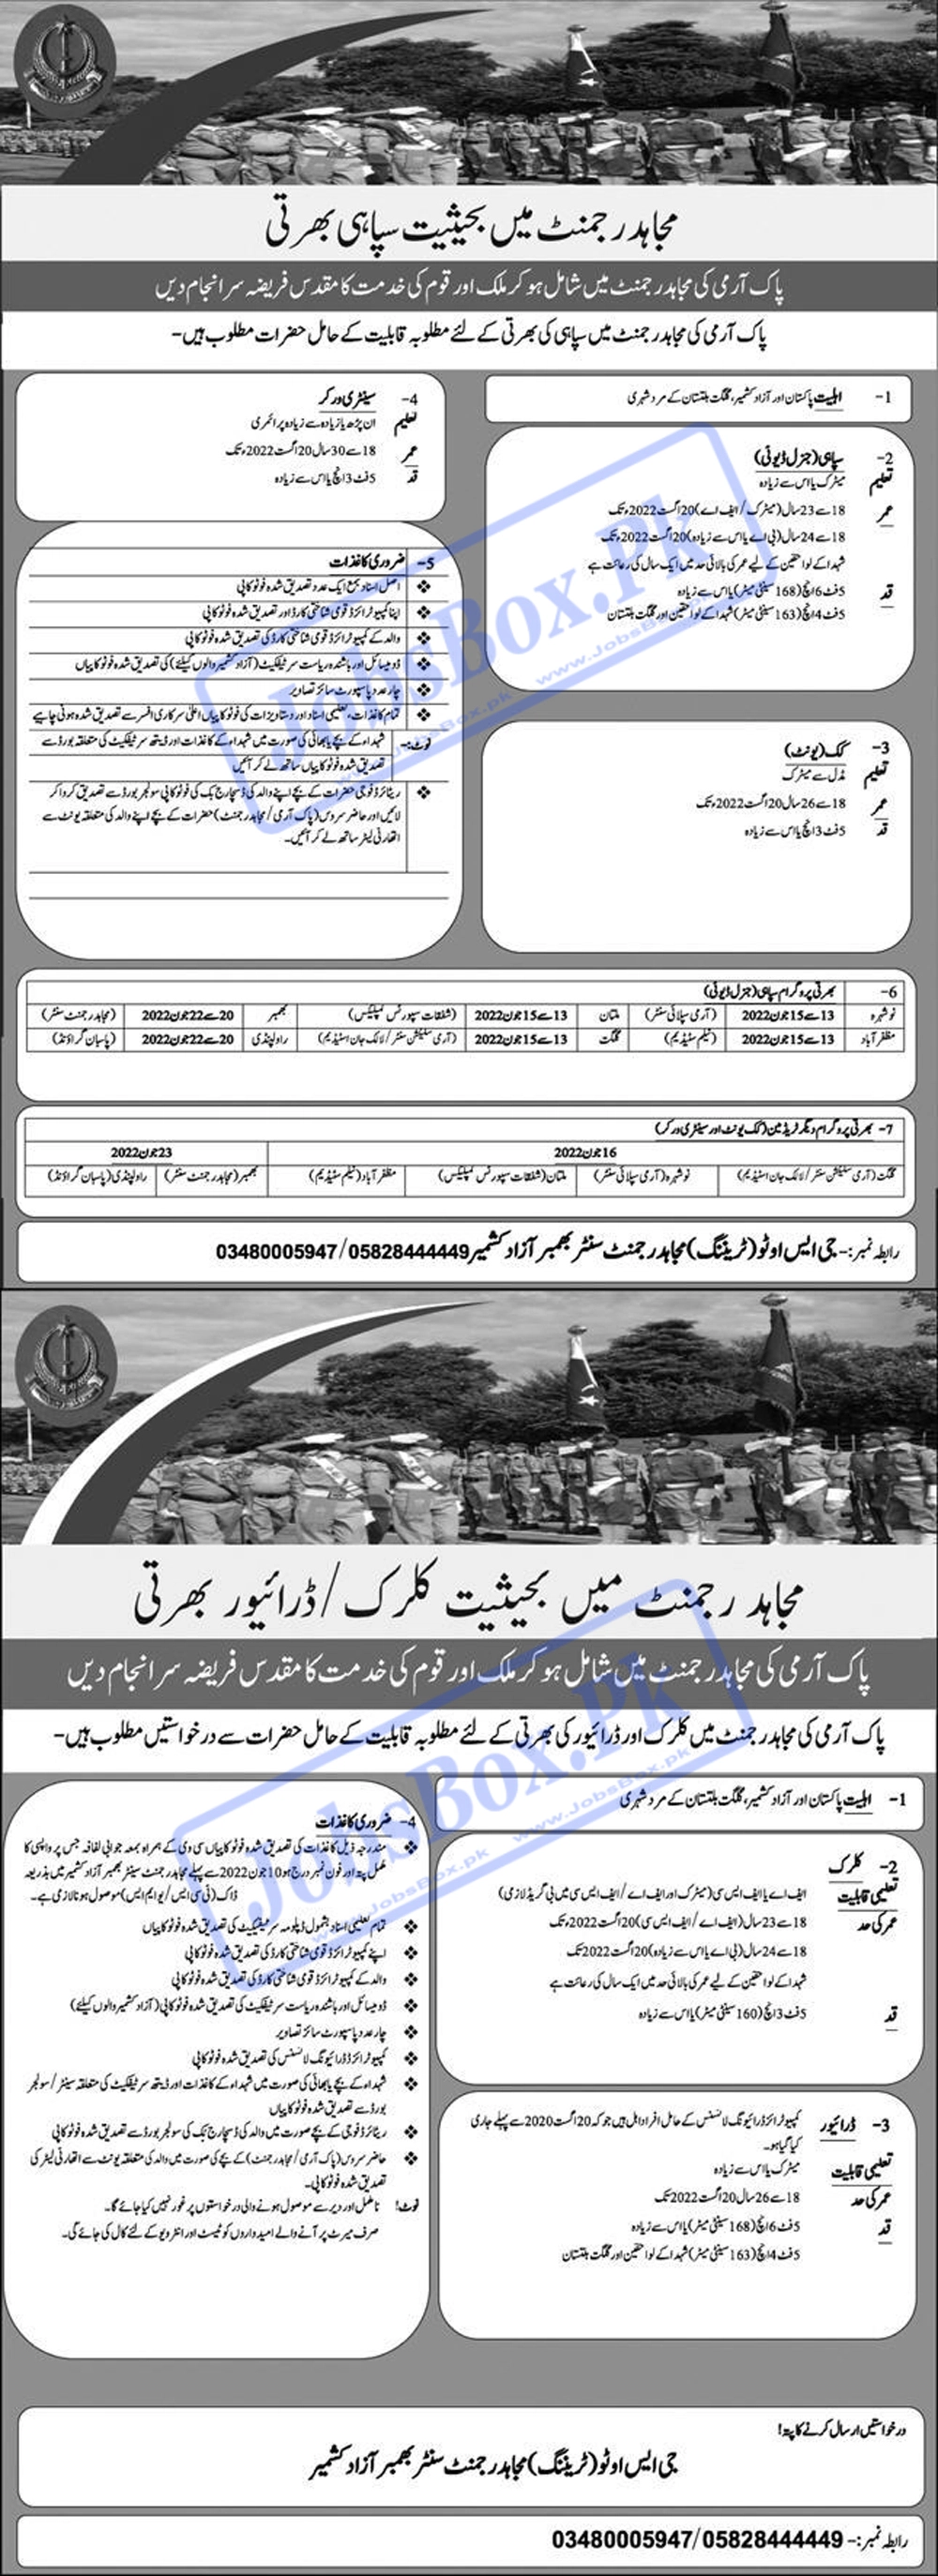 Join Pak Army Jobs 2022 in Mujahid Regiment Advertisement for Soldier, Clerk & Driver